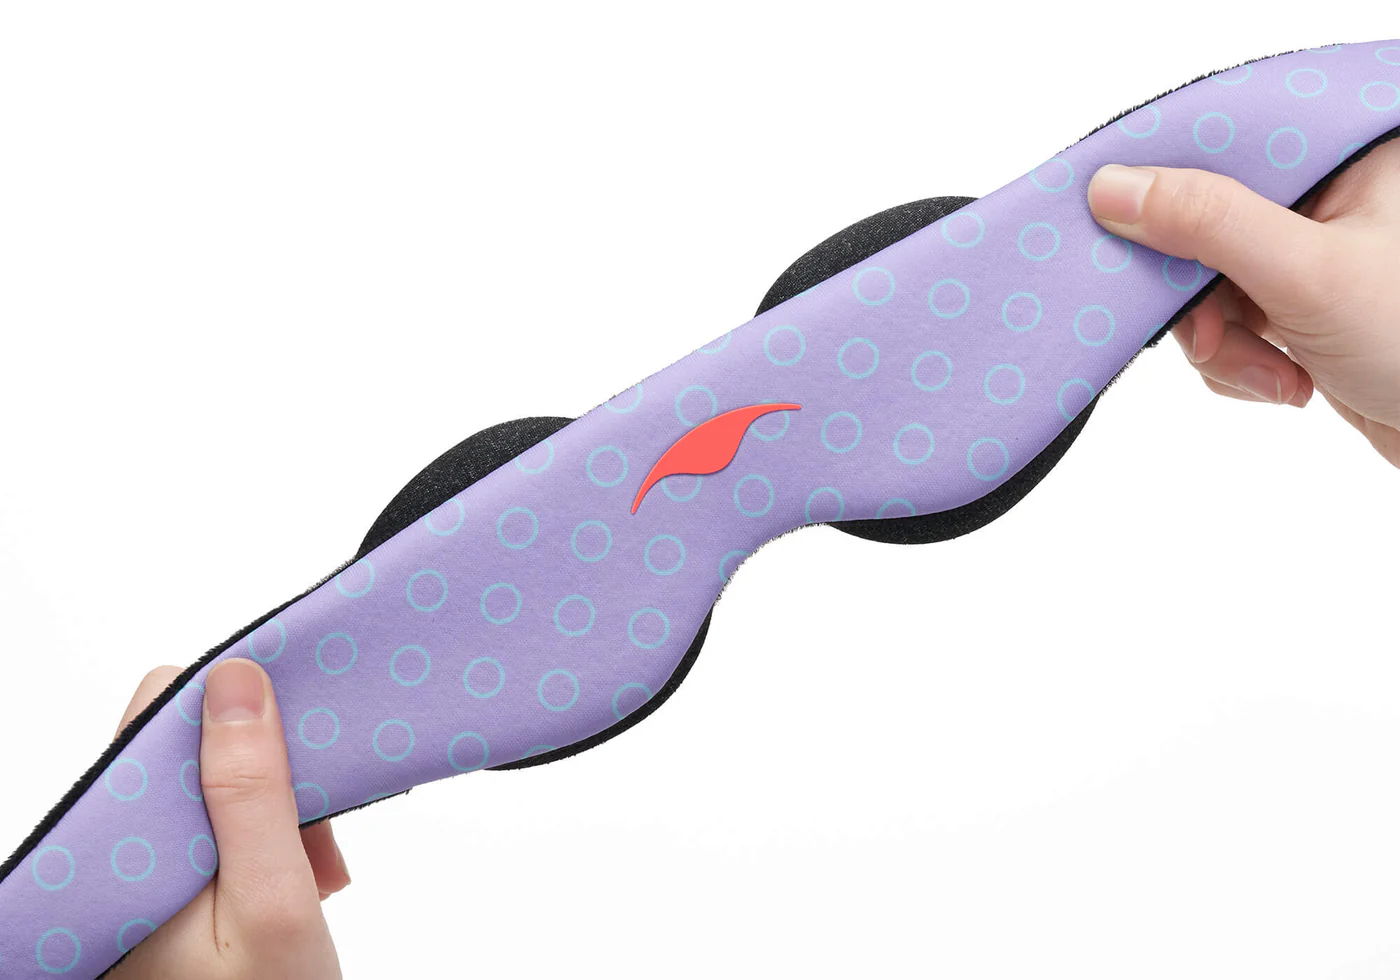 Hands squeezing the purple strap of a sleep mask for kids with eye cups attached to the interior.